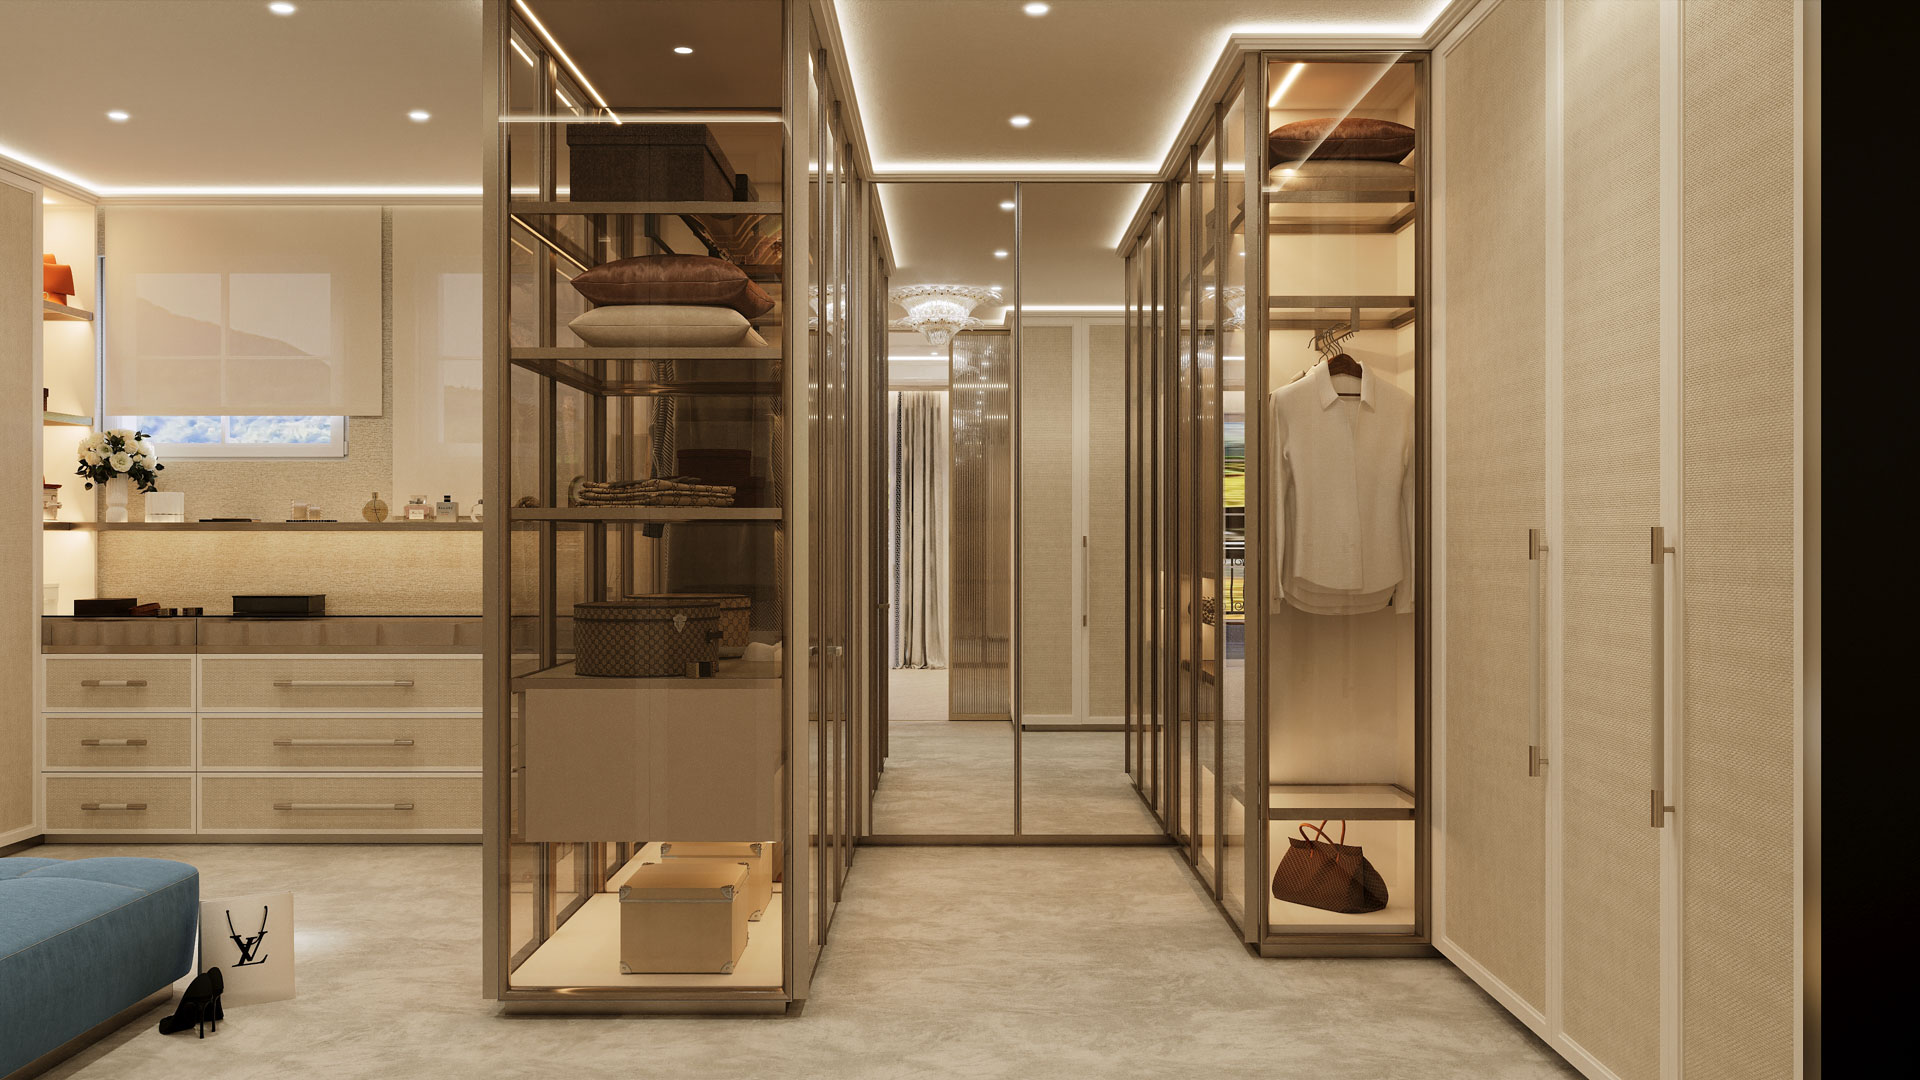 A luxurious walk-in closet with mirrored doors, display shelves, drawers, and elegant lighting, creating a bright and organized space.